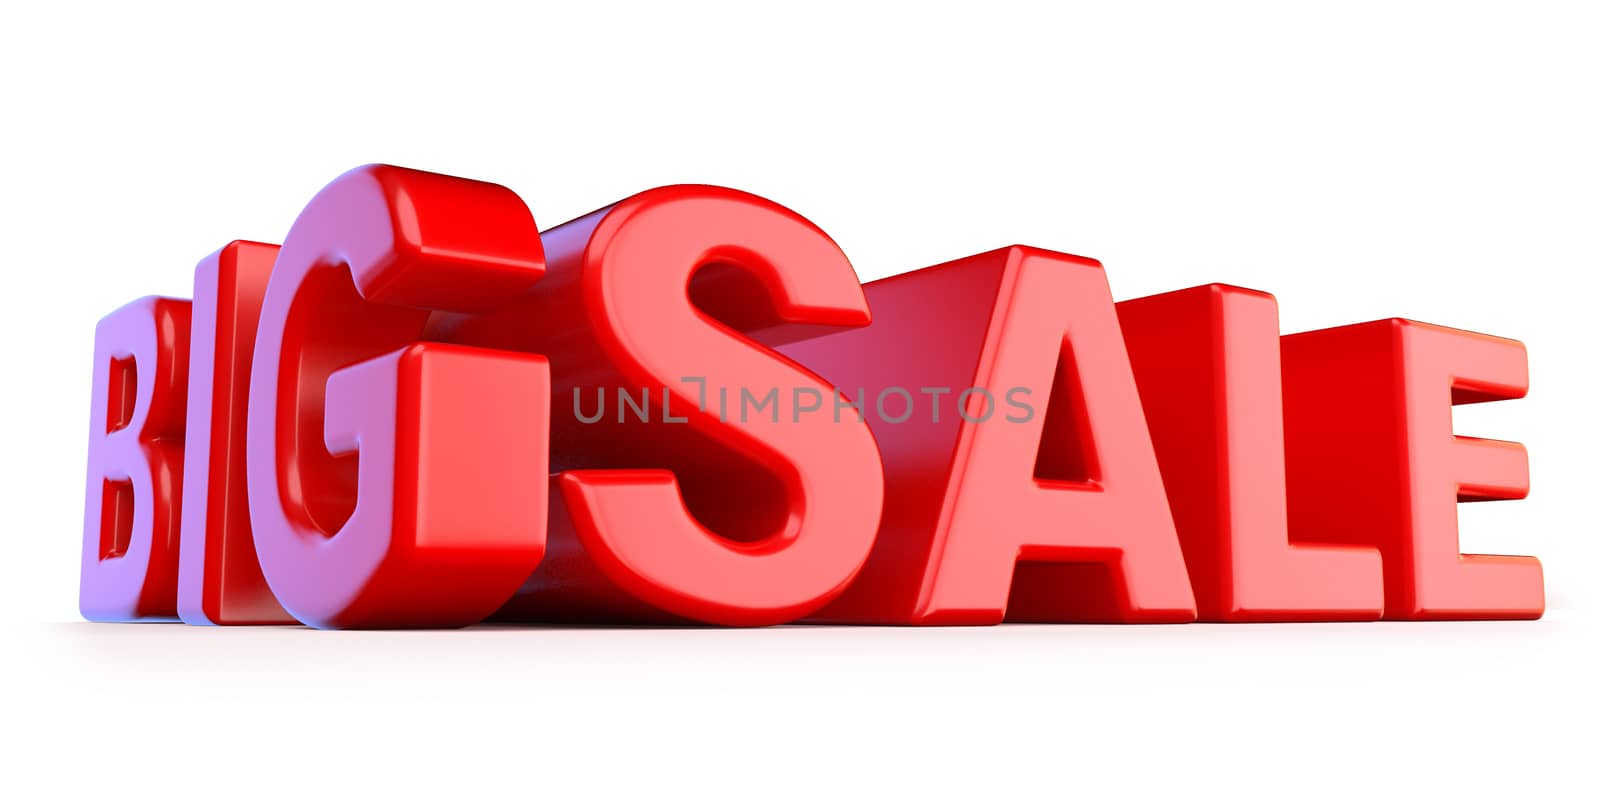 Big sale 3D red text render illustration isolated on white background